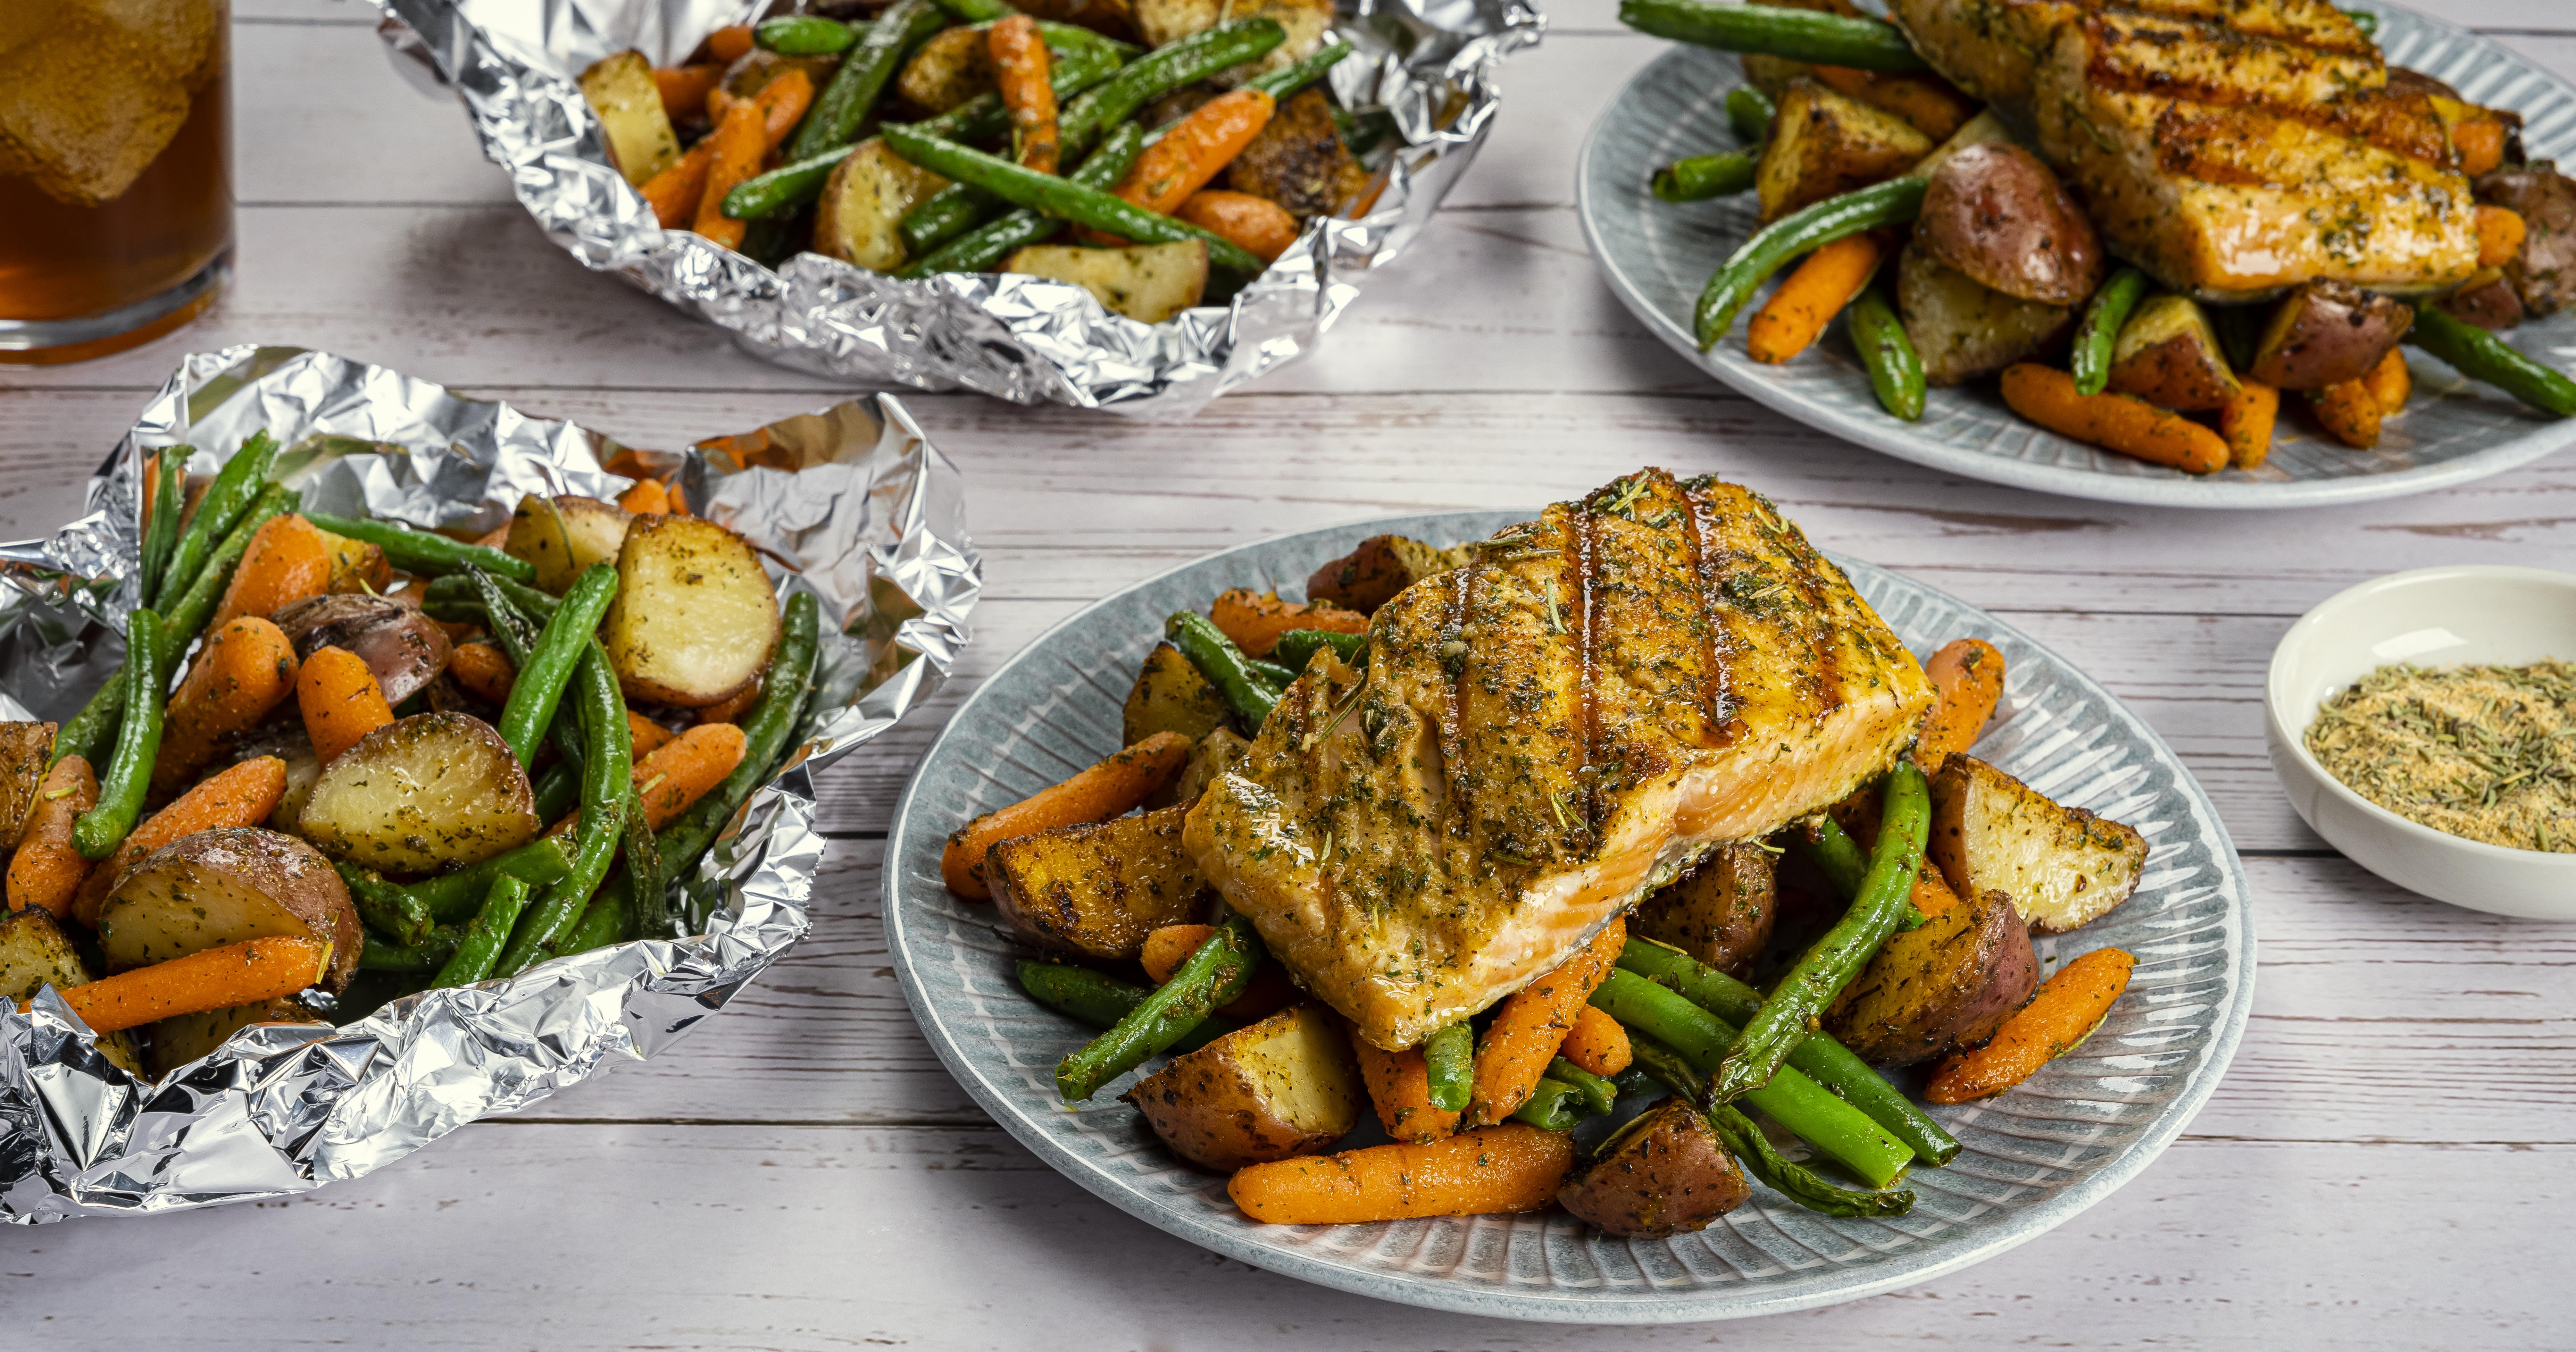 Herb Salmon and Foil Pack Grillers